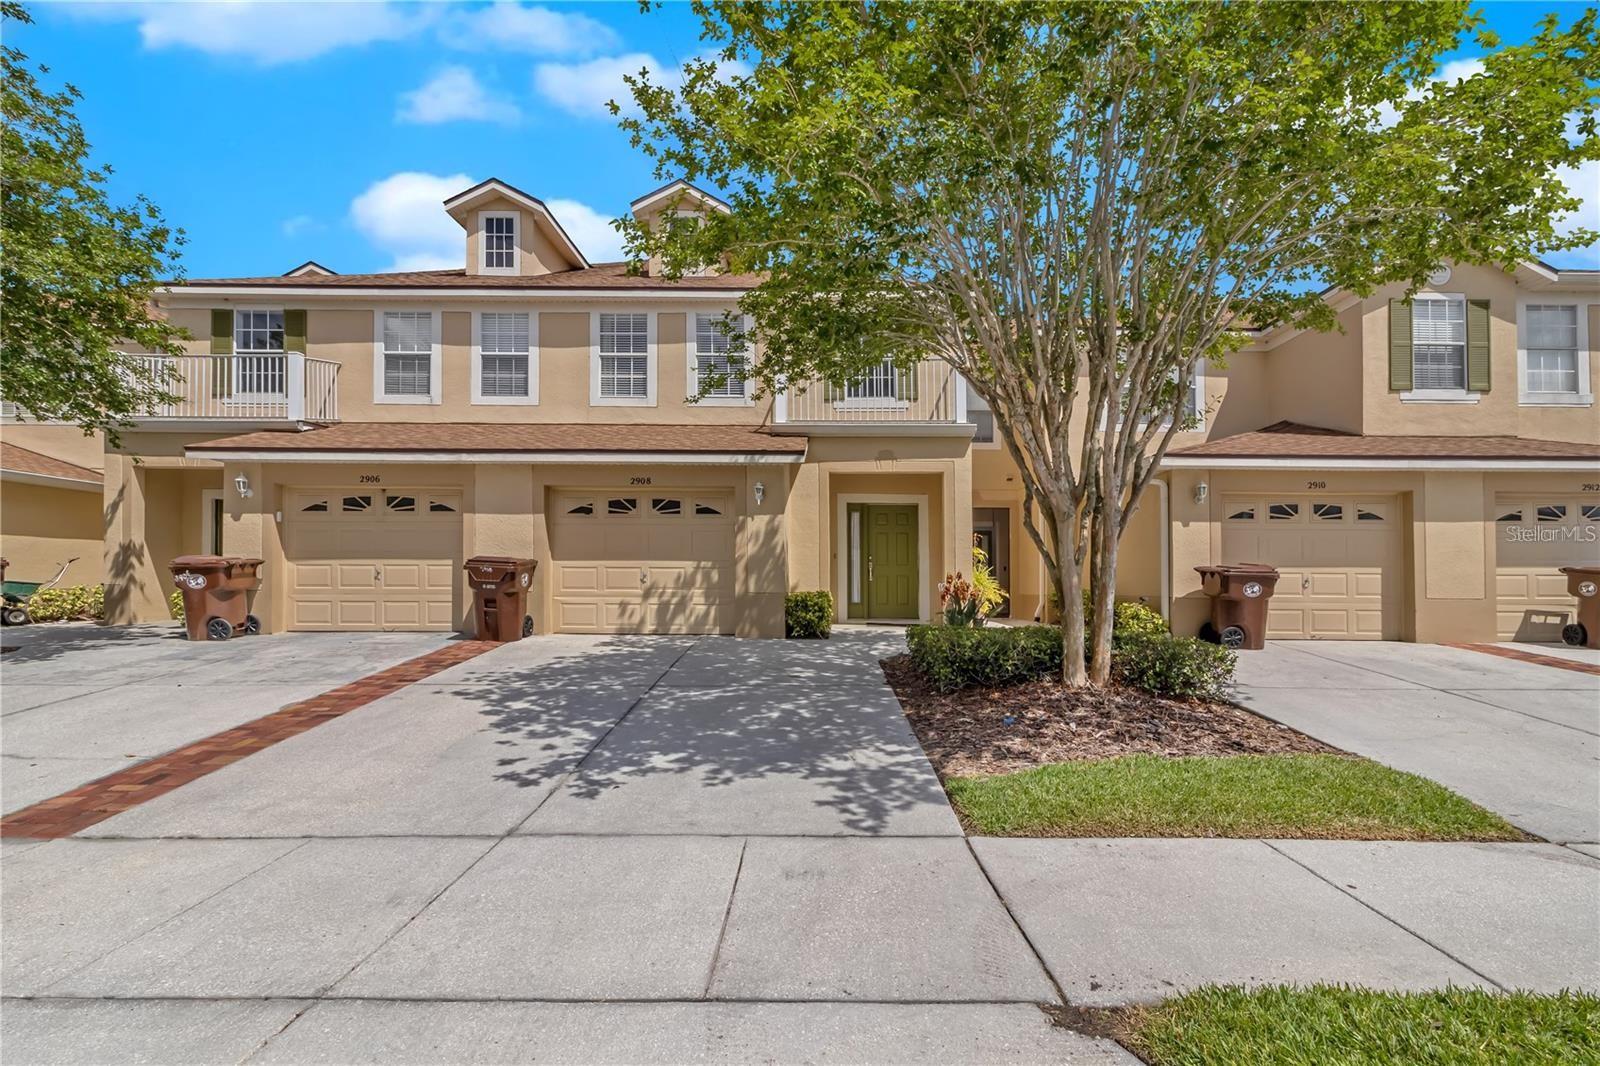 View KISSIMMEE, FL 34741 townhome